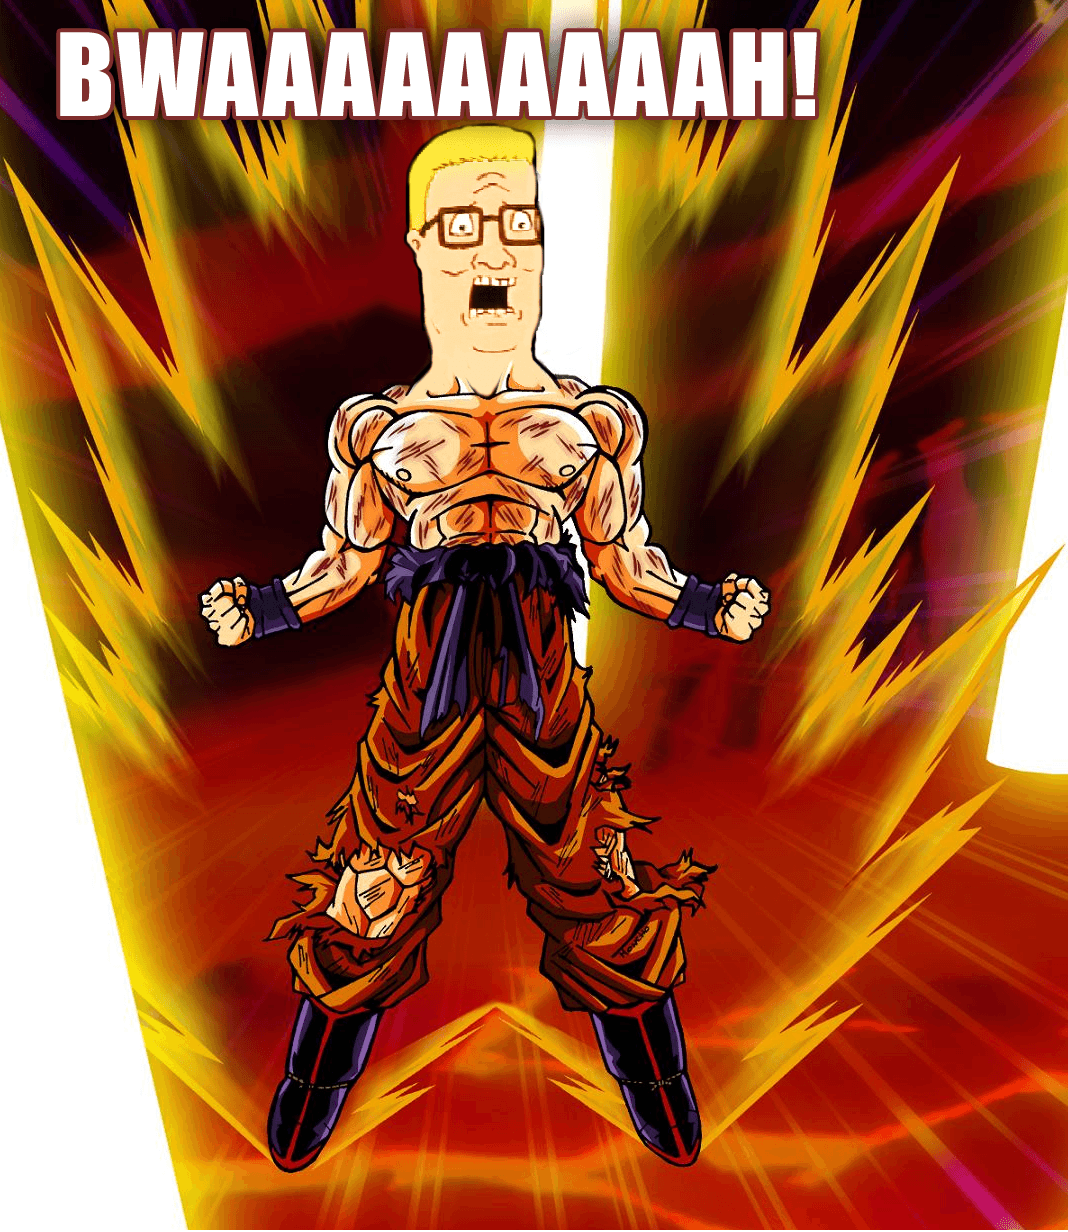 When King of the Hill meets Dragon Ball Z. You have to know both